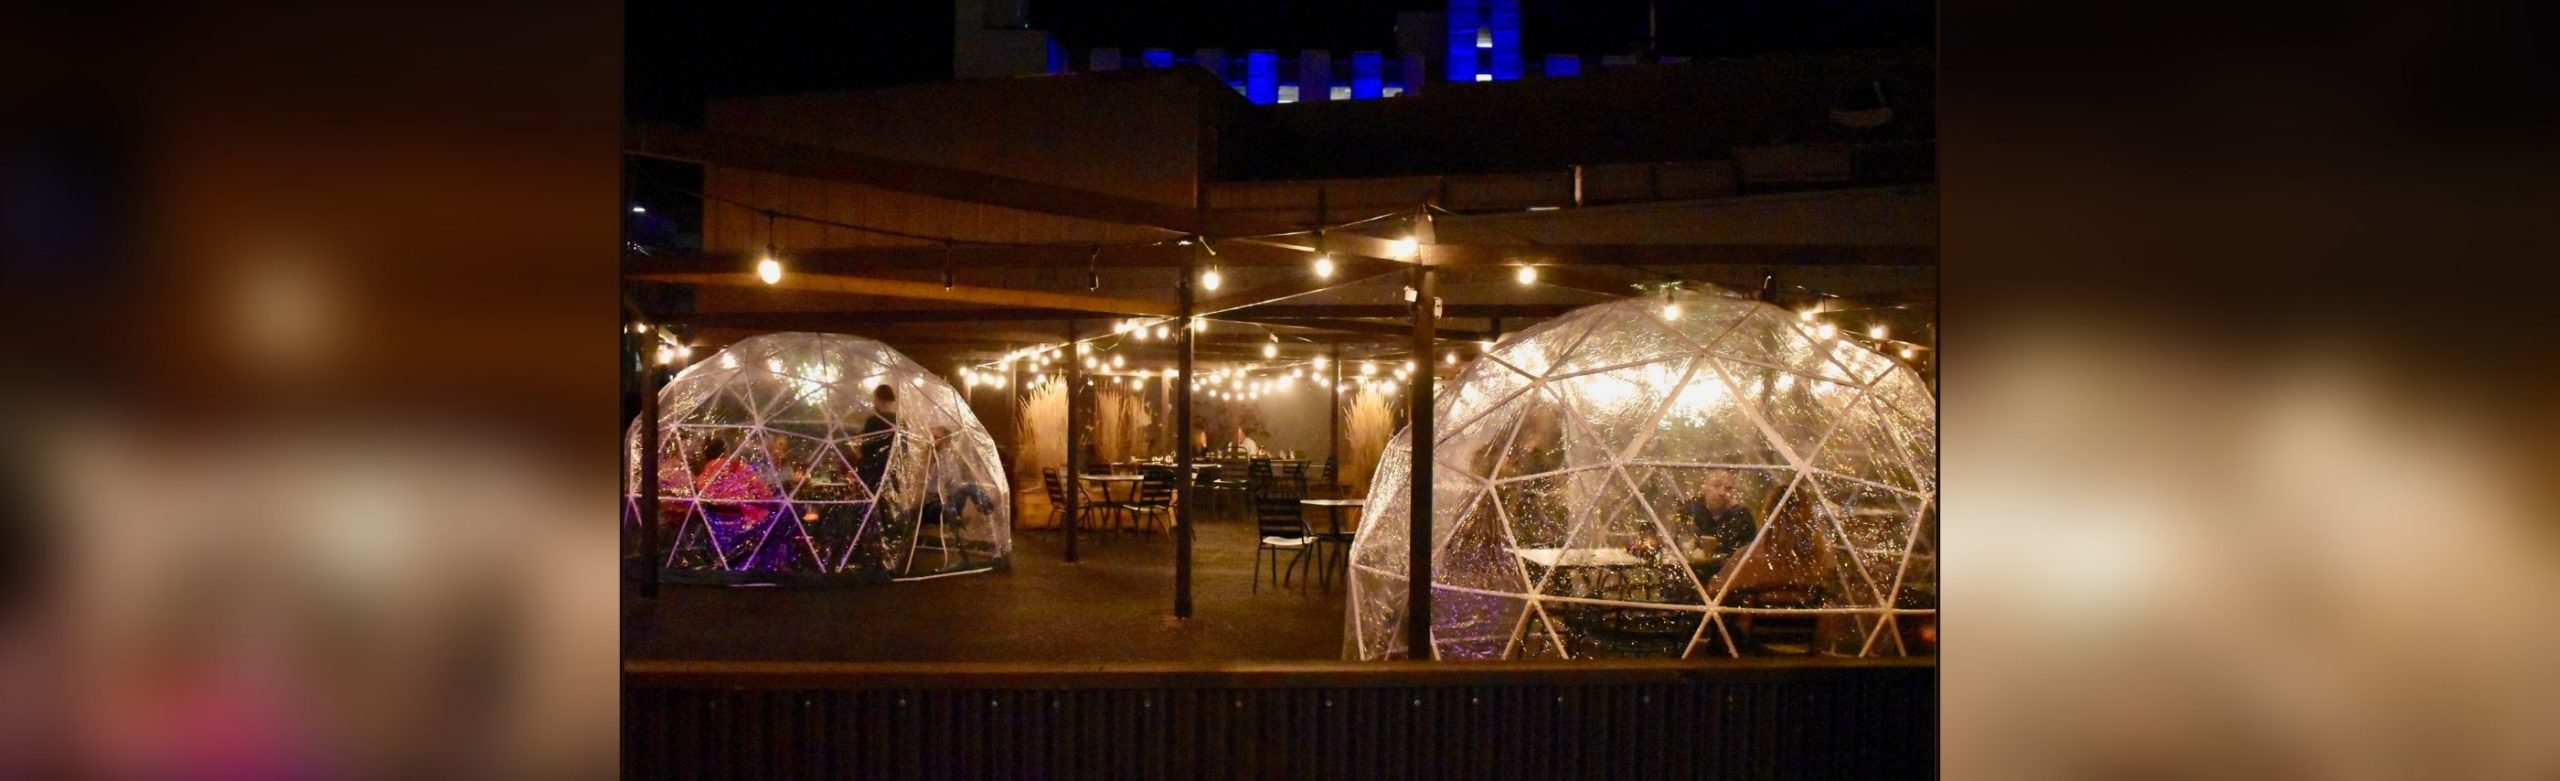 Top Hat Restaurant Offers Outdoor Dome Seating in Missoula Image